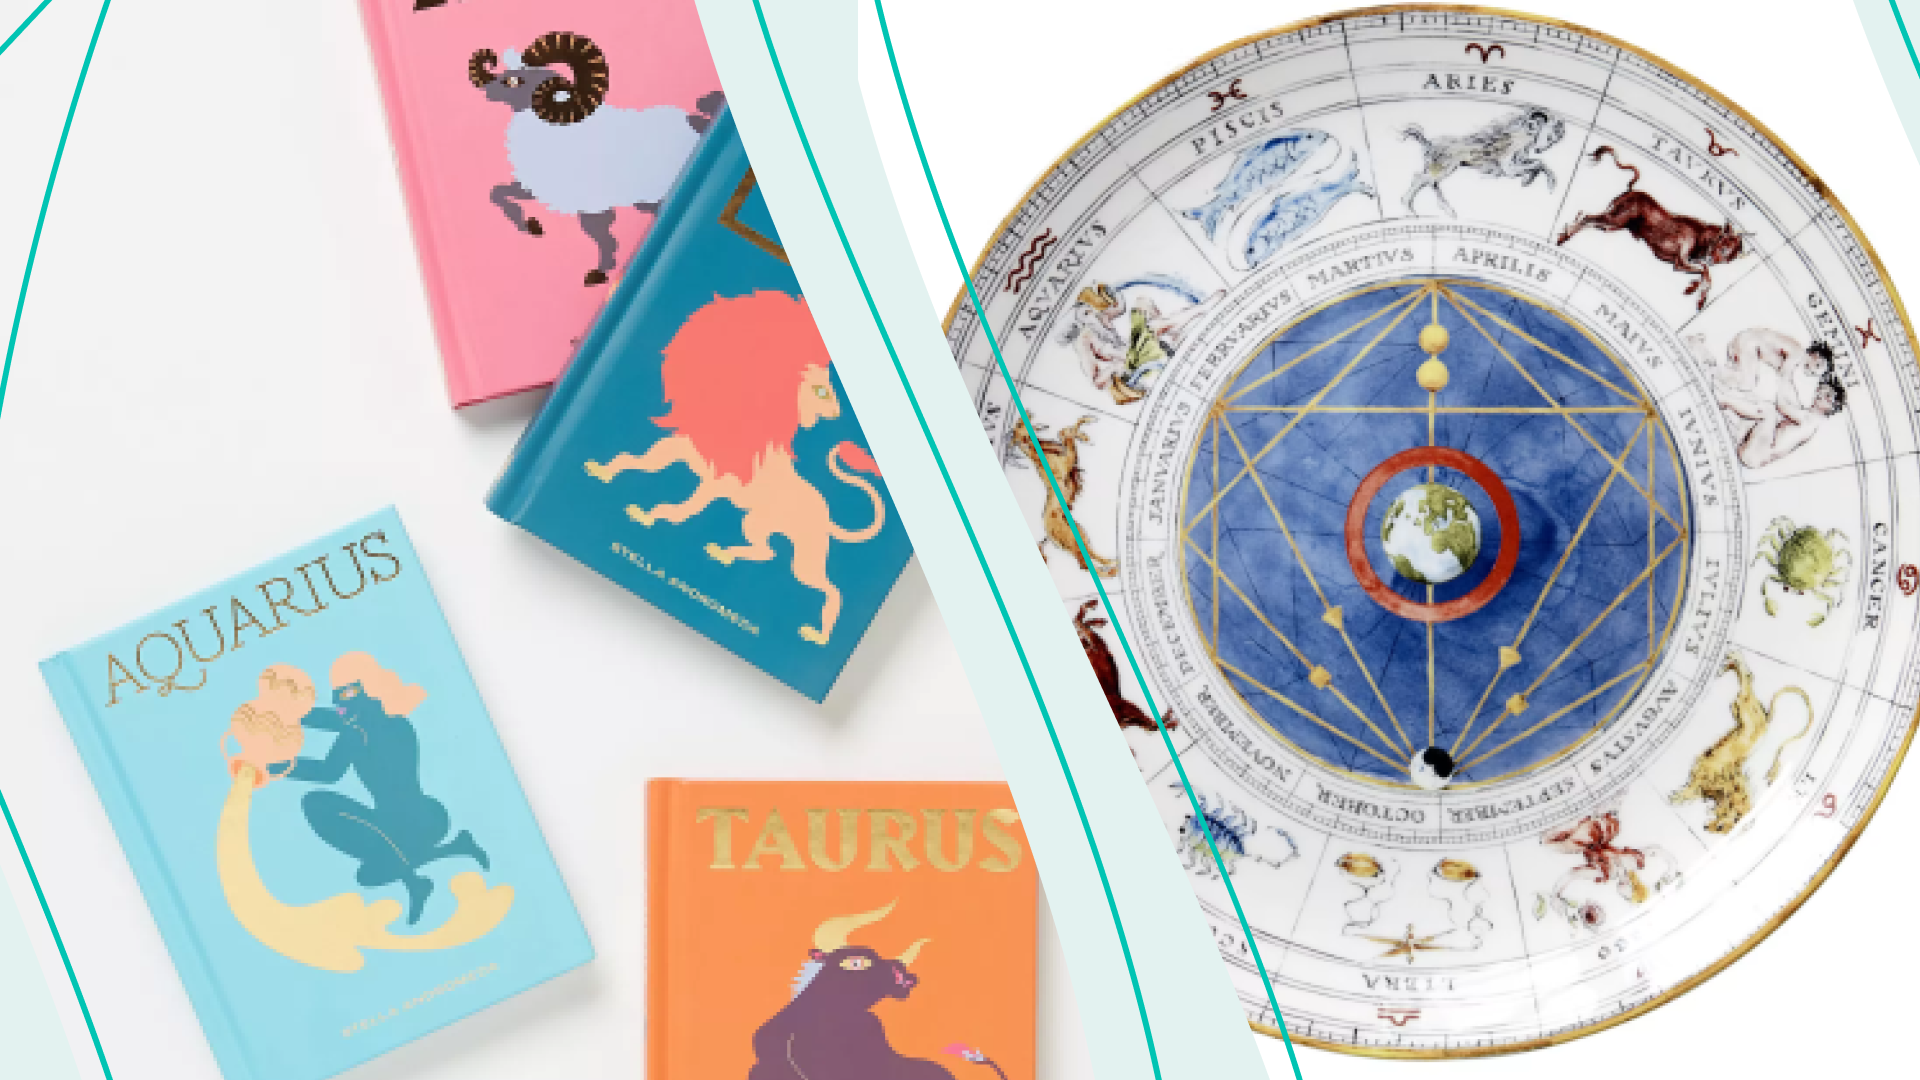 10 May – Know your today's horoscope